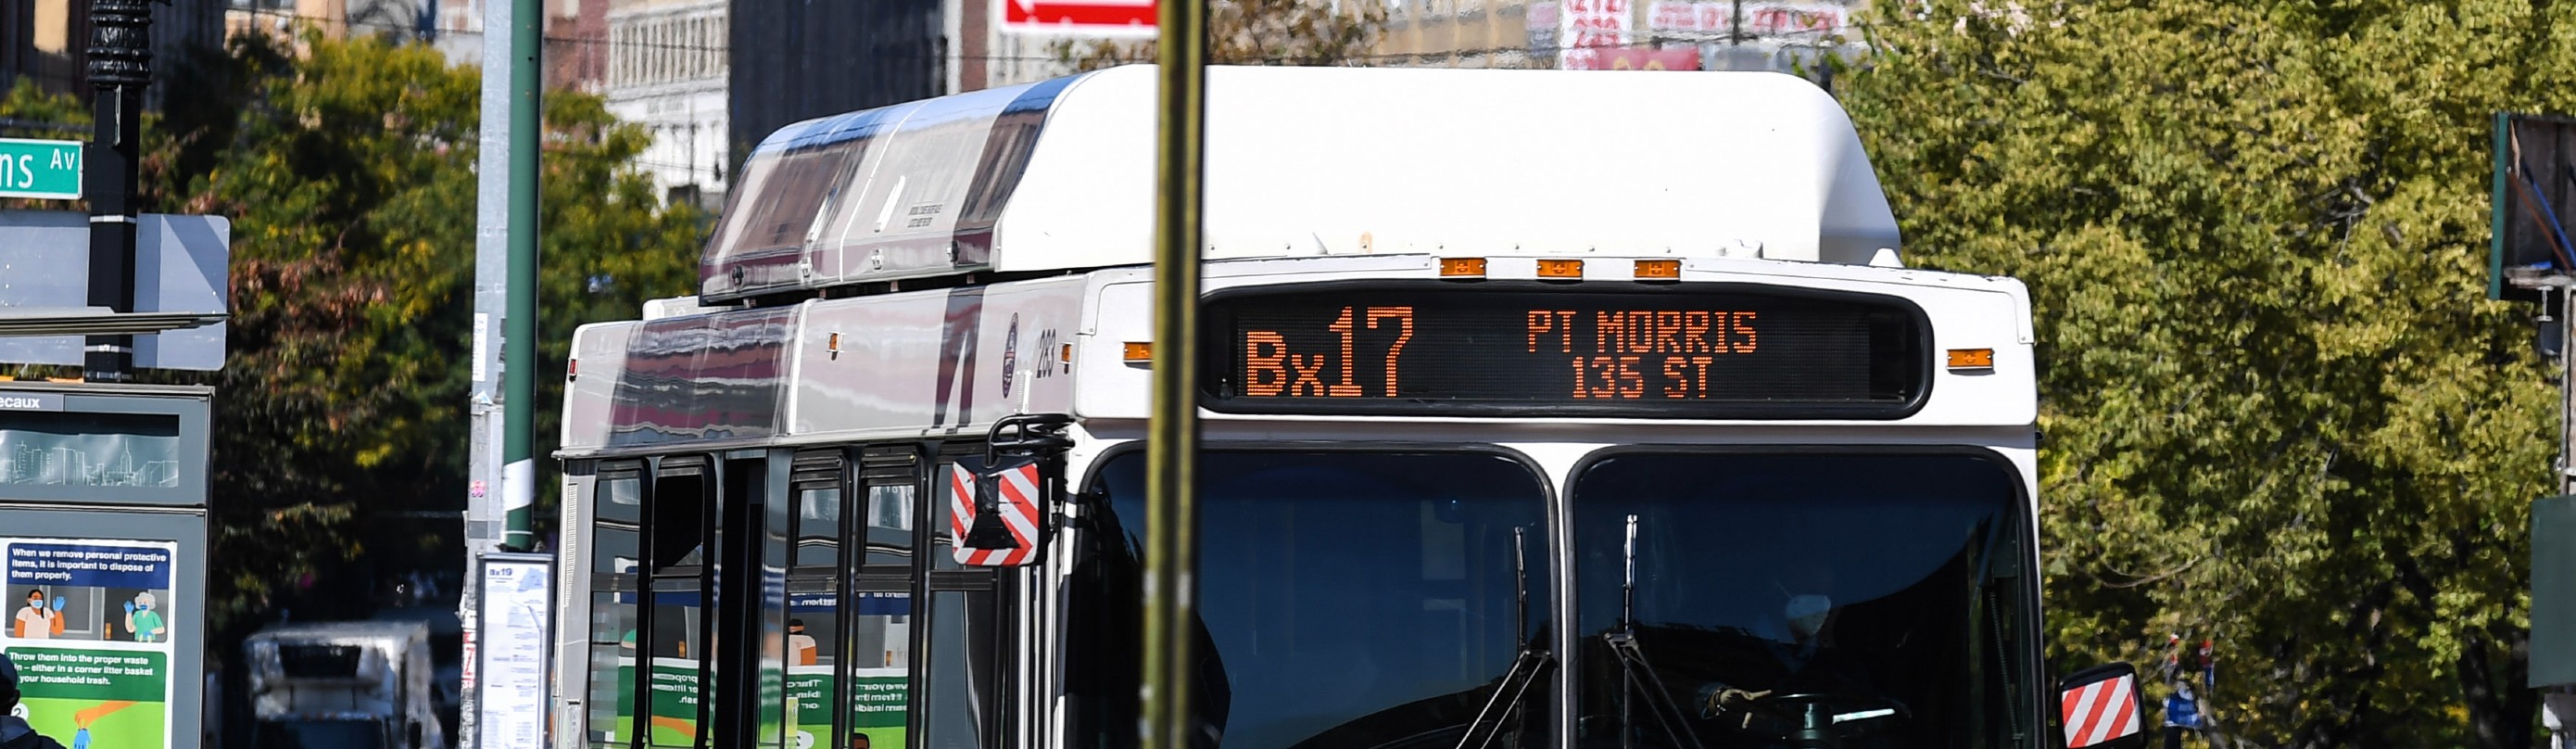 A bus with an electronic scroll at the top that says Bx17